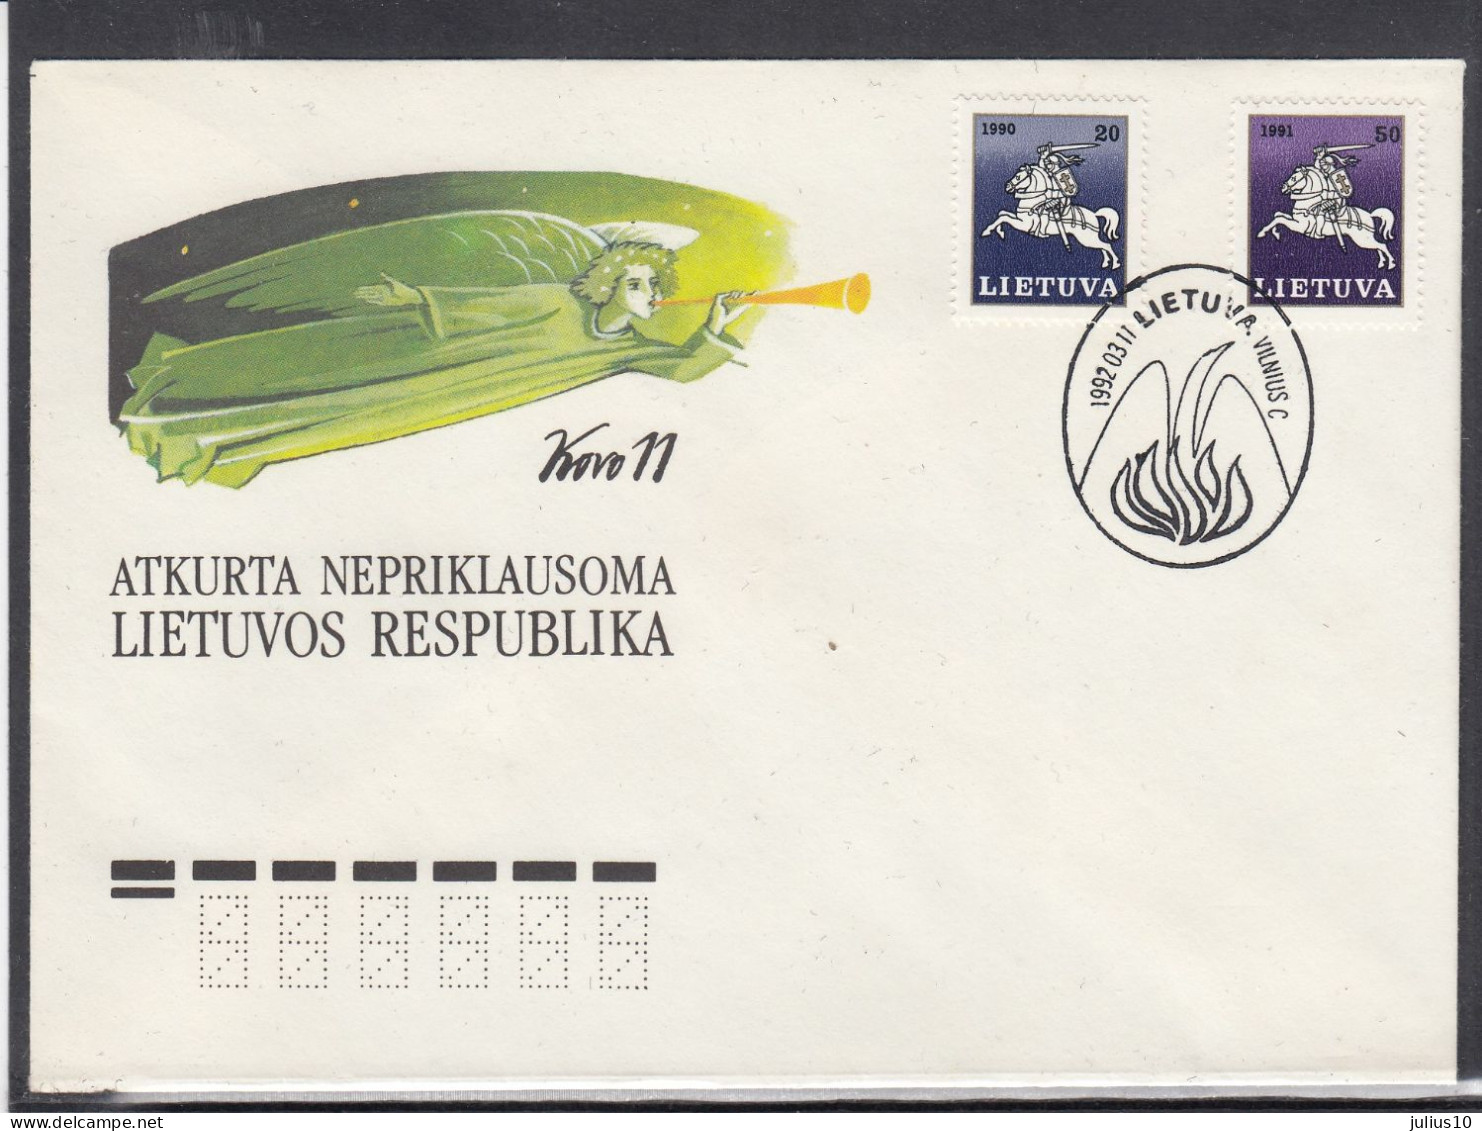 LITHUANIA 1992 Cover Special Cancel Independance Anniversary #LTV249 - Lituania